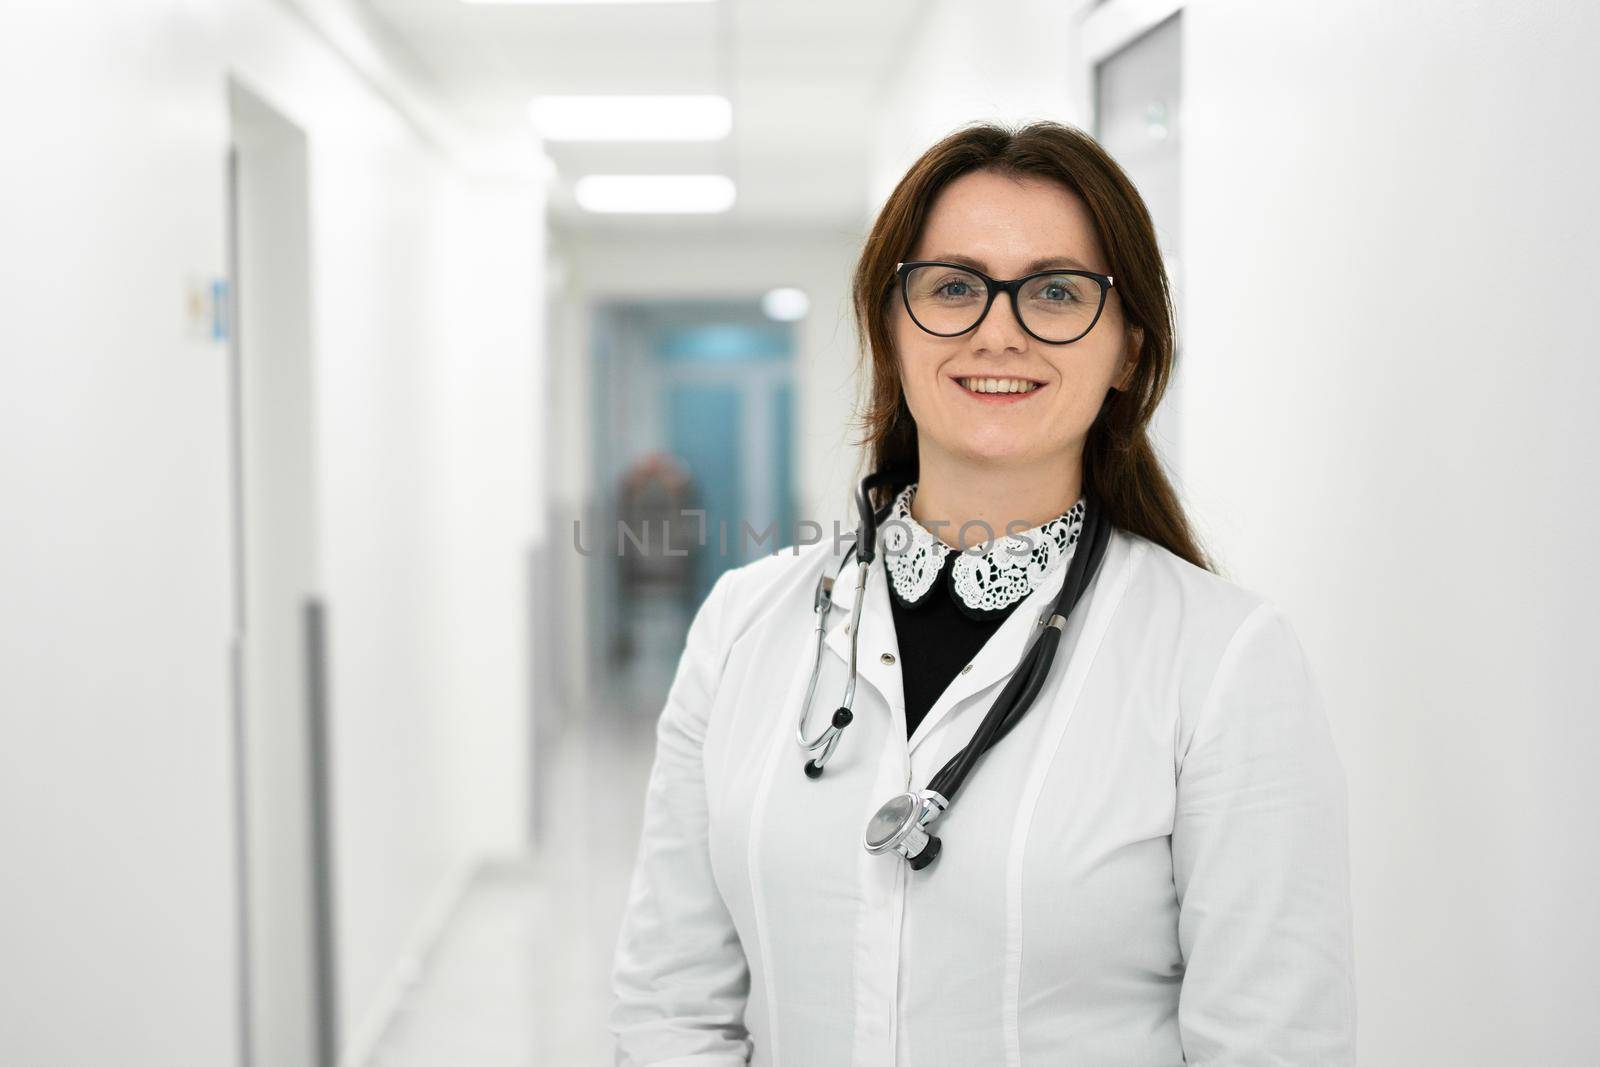 Headshot portrait of smiling millennial female doctor wearing medical uniform and stethoscope looking at camera in the corridor of a modern hospital. Healthcare concept, medical insurance.